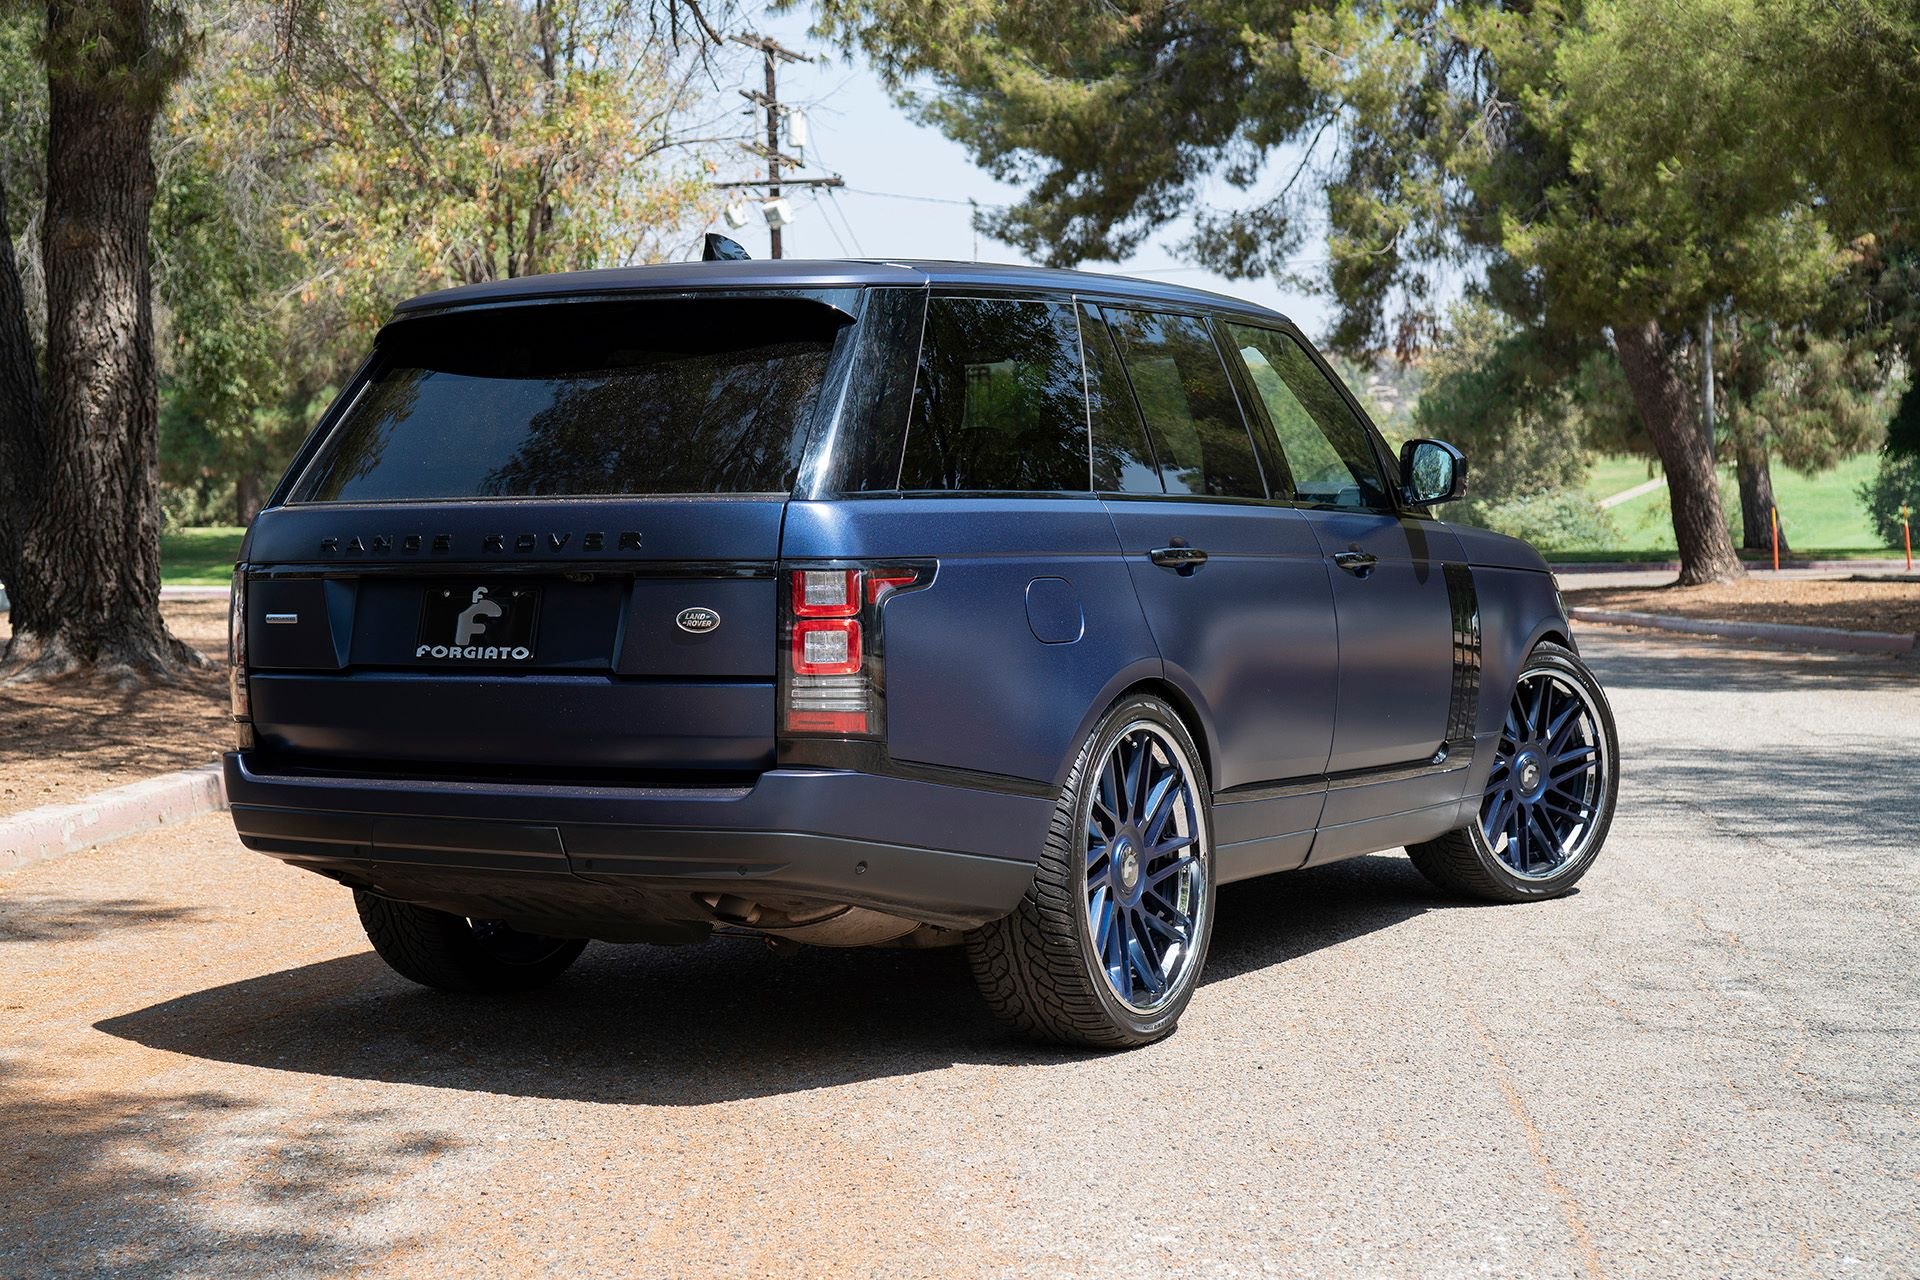 Red Clear LED Taillights on Blue Range Rover - Photo by Forgiato